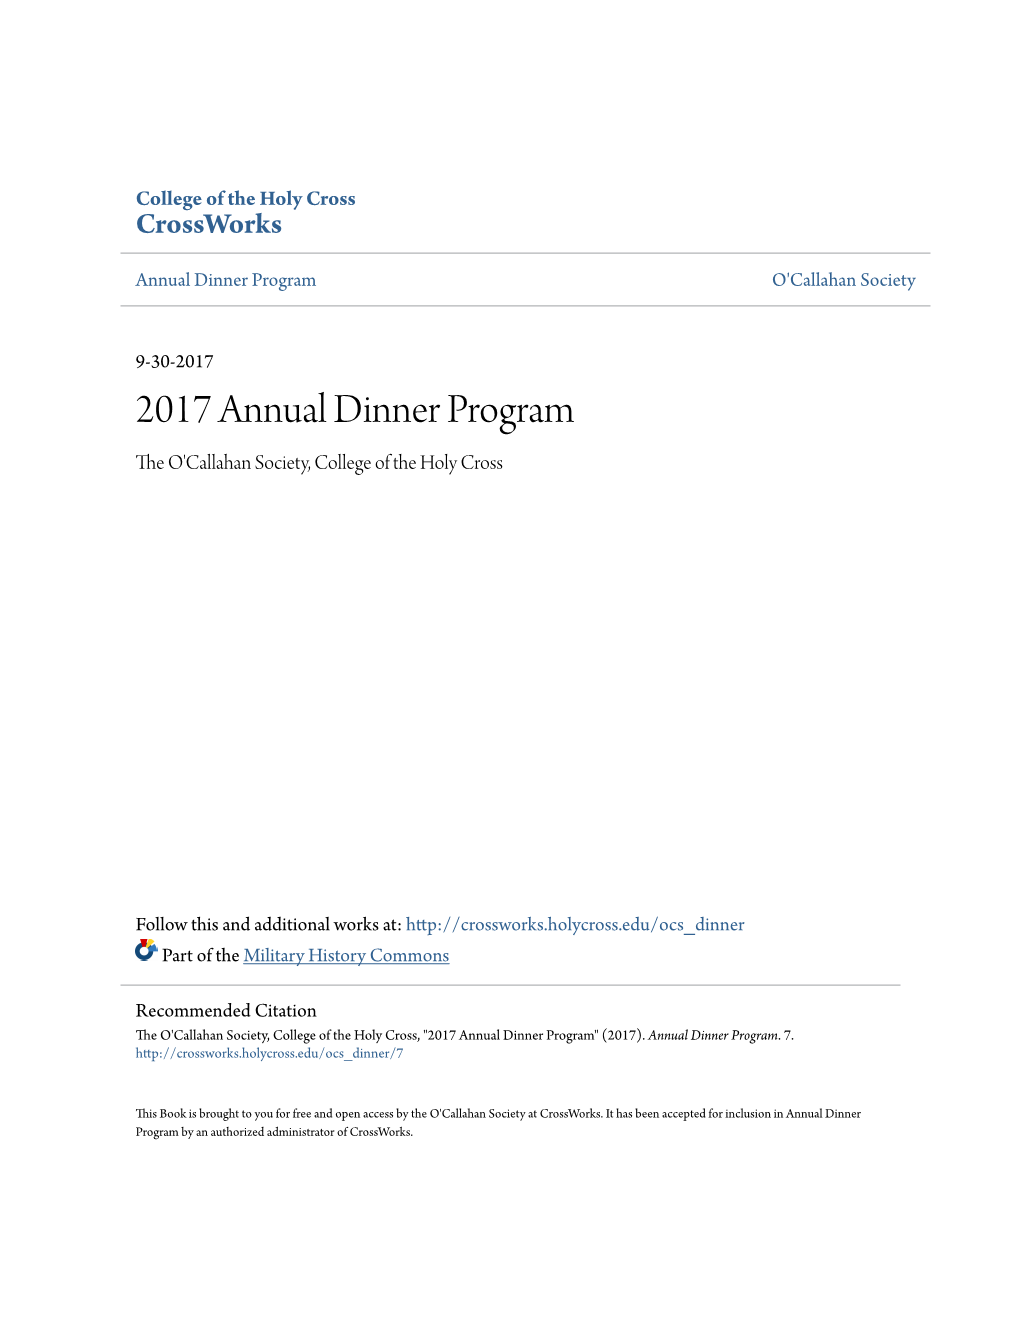 2017 Annual Dinner Program the 'Ocallahan Society, College of the Holy Cross